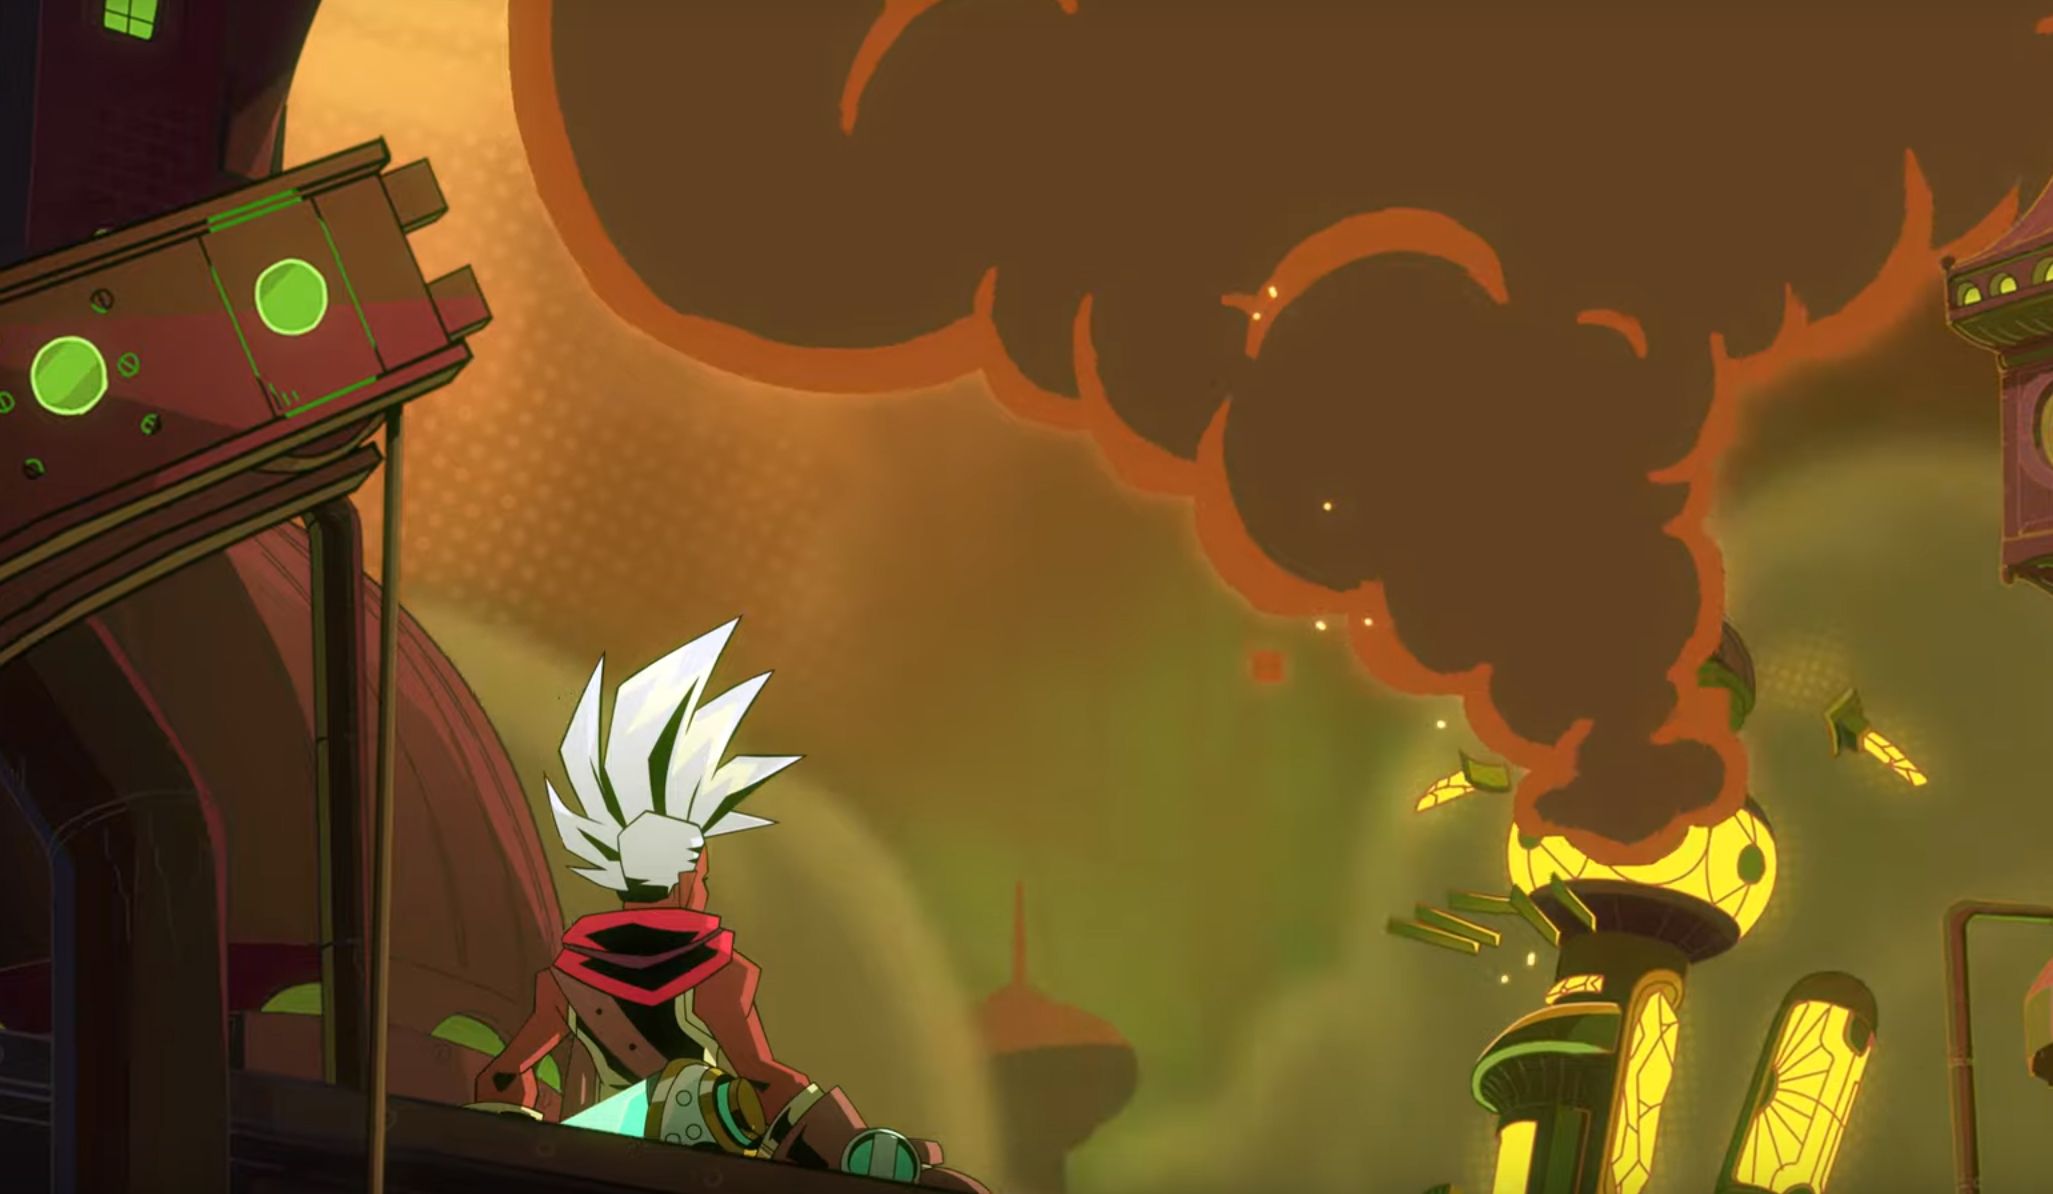 League of Legends Spin-off Games About Nunu and Ekko Coming in 2022